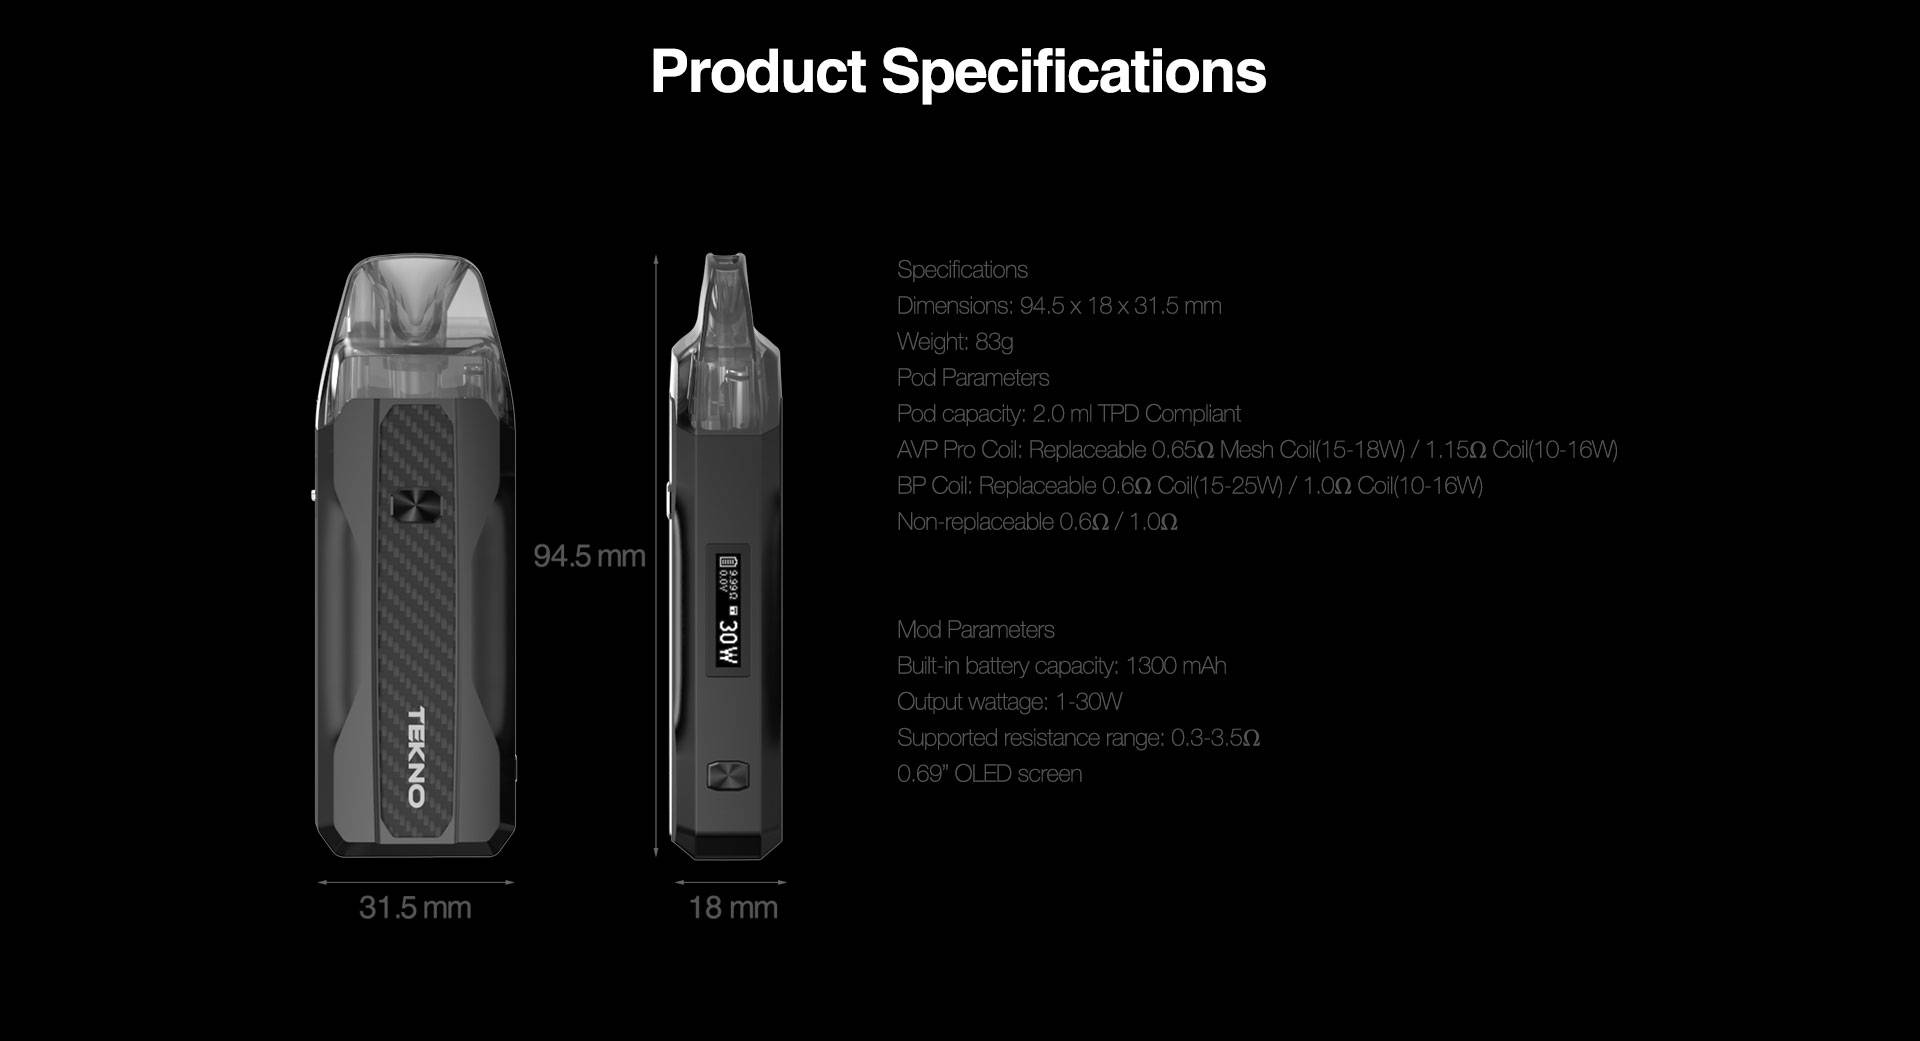 Specifications Dimensions: 94.5*18*31.5 mm Weight: 83g Pod Parameters Pod capacity: 3.5 ml (use BP coil) / 3.0 ml (use AVP pro coil) / 2.0 ml (TPD version) / 2.0 ml (Danish version) AVP Pro Coil: Replaceable 0.65Ω Mesh Coil(15-18W) / 1.15Ω Coil(10-16W) BP Coil: Replaceable 0.6Ω Coil(15-25W) / 1.0Ω Coil(10-16W) Non-replaceable 0.6Ω / 1.0Ω   Mod Parameters Built-in battery capacity: 1300 mAh Output wattage: 1-30W Supported resistance range: 0.3-3.5Ω 0.69” OLED screen